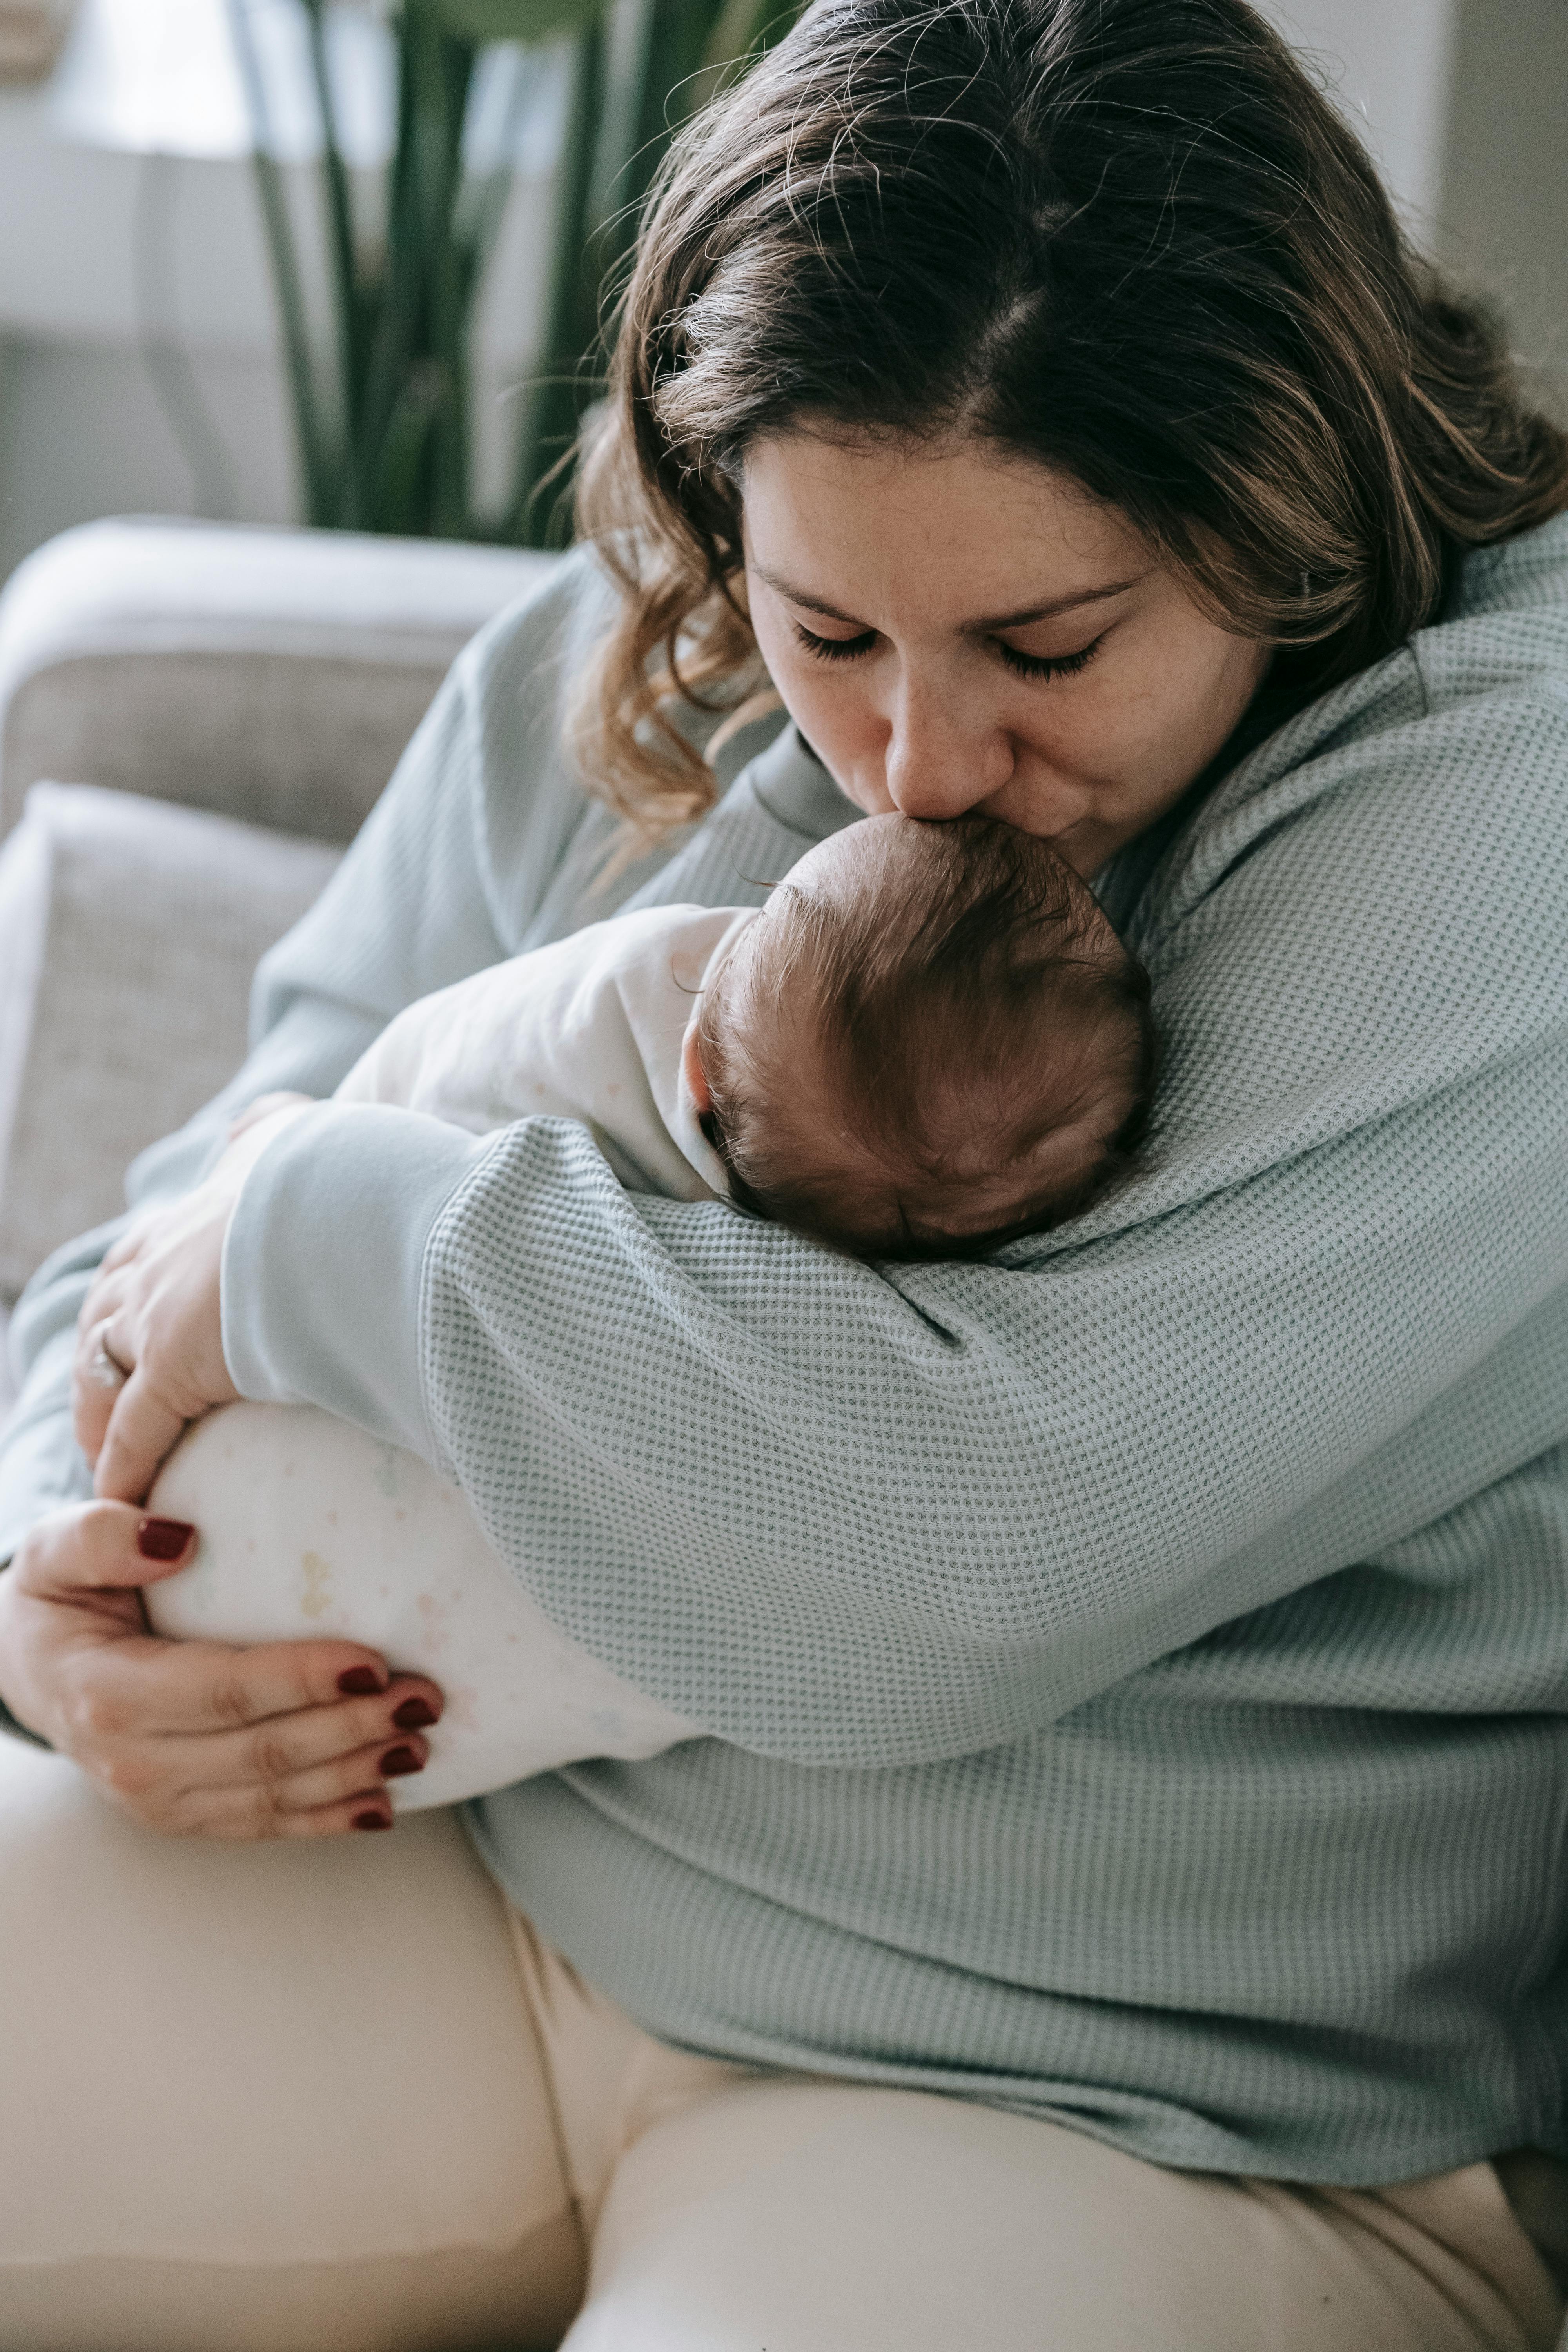 A woman kissing her baby's forehead | Source: Pexels